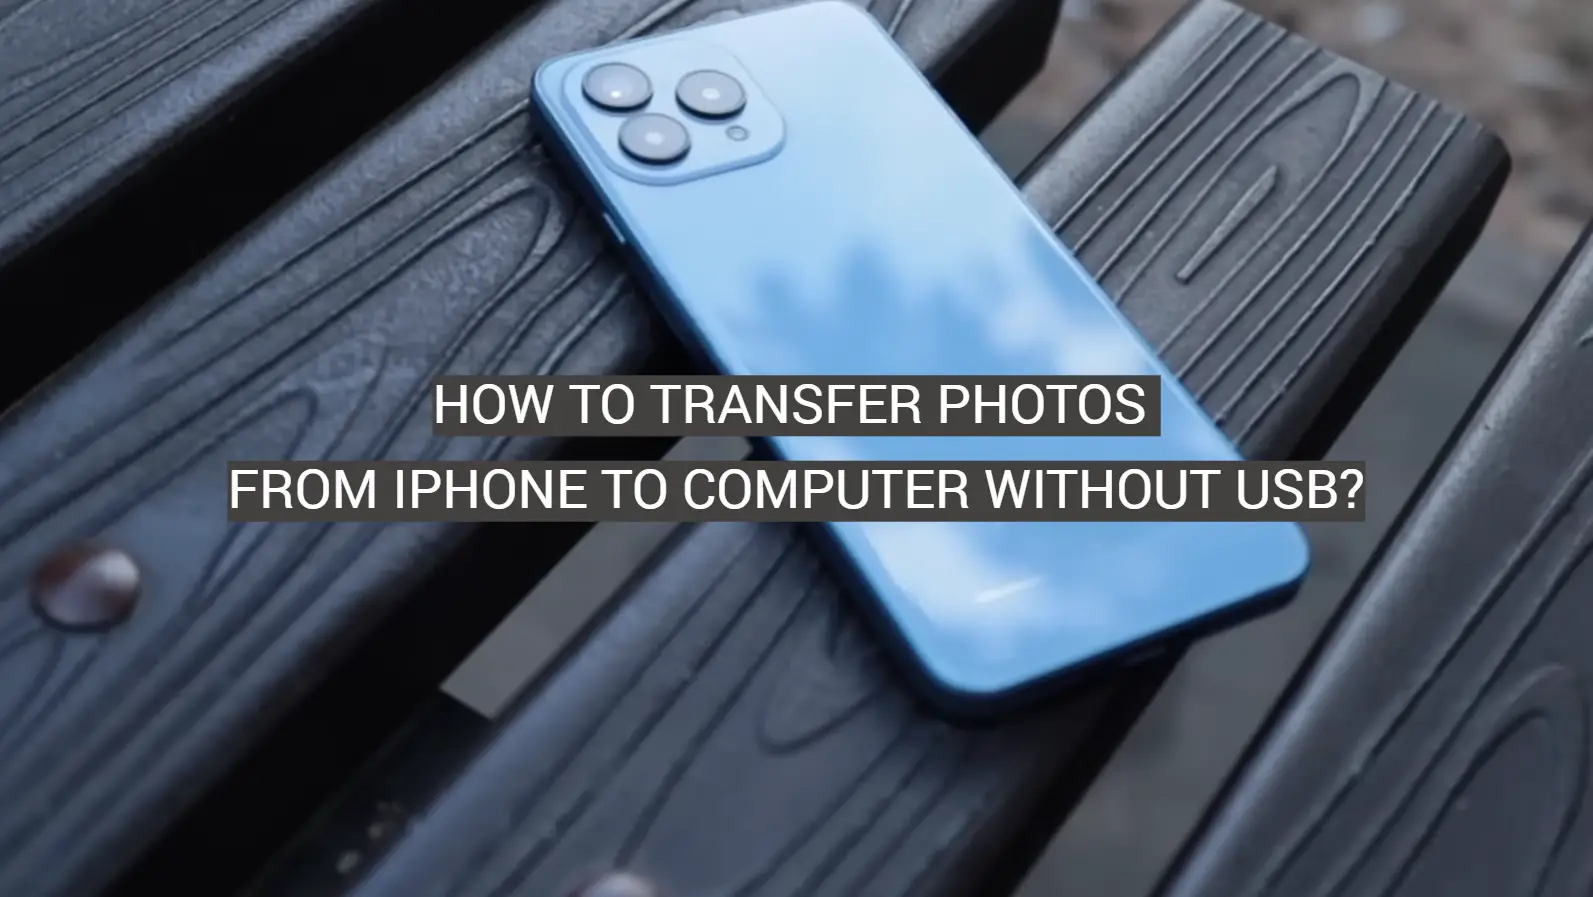 How to Transfer Photos From iPhone to Computer Without USB?